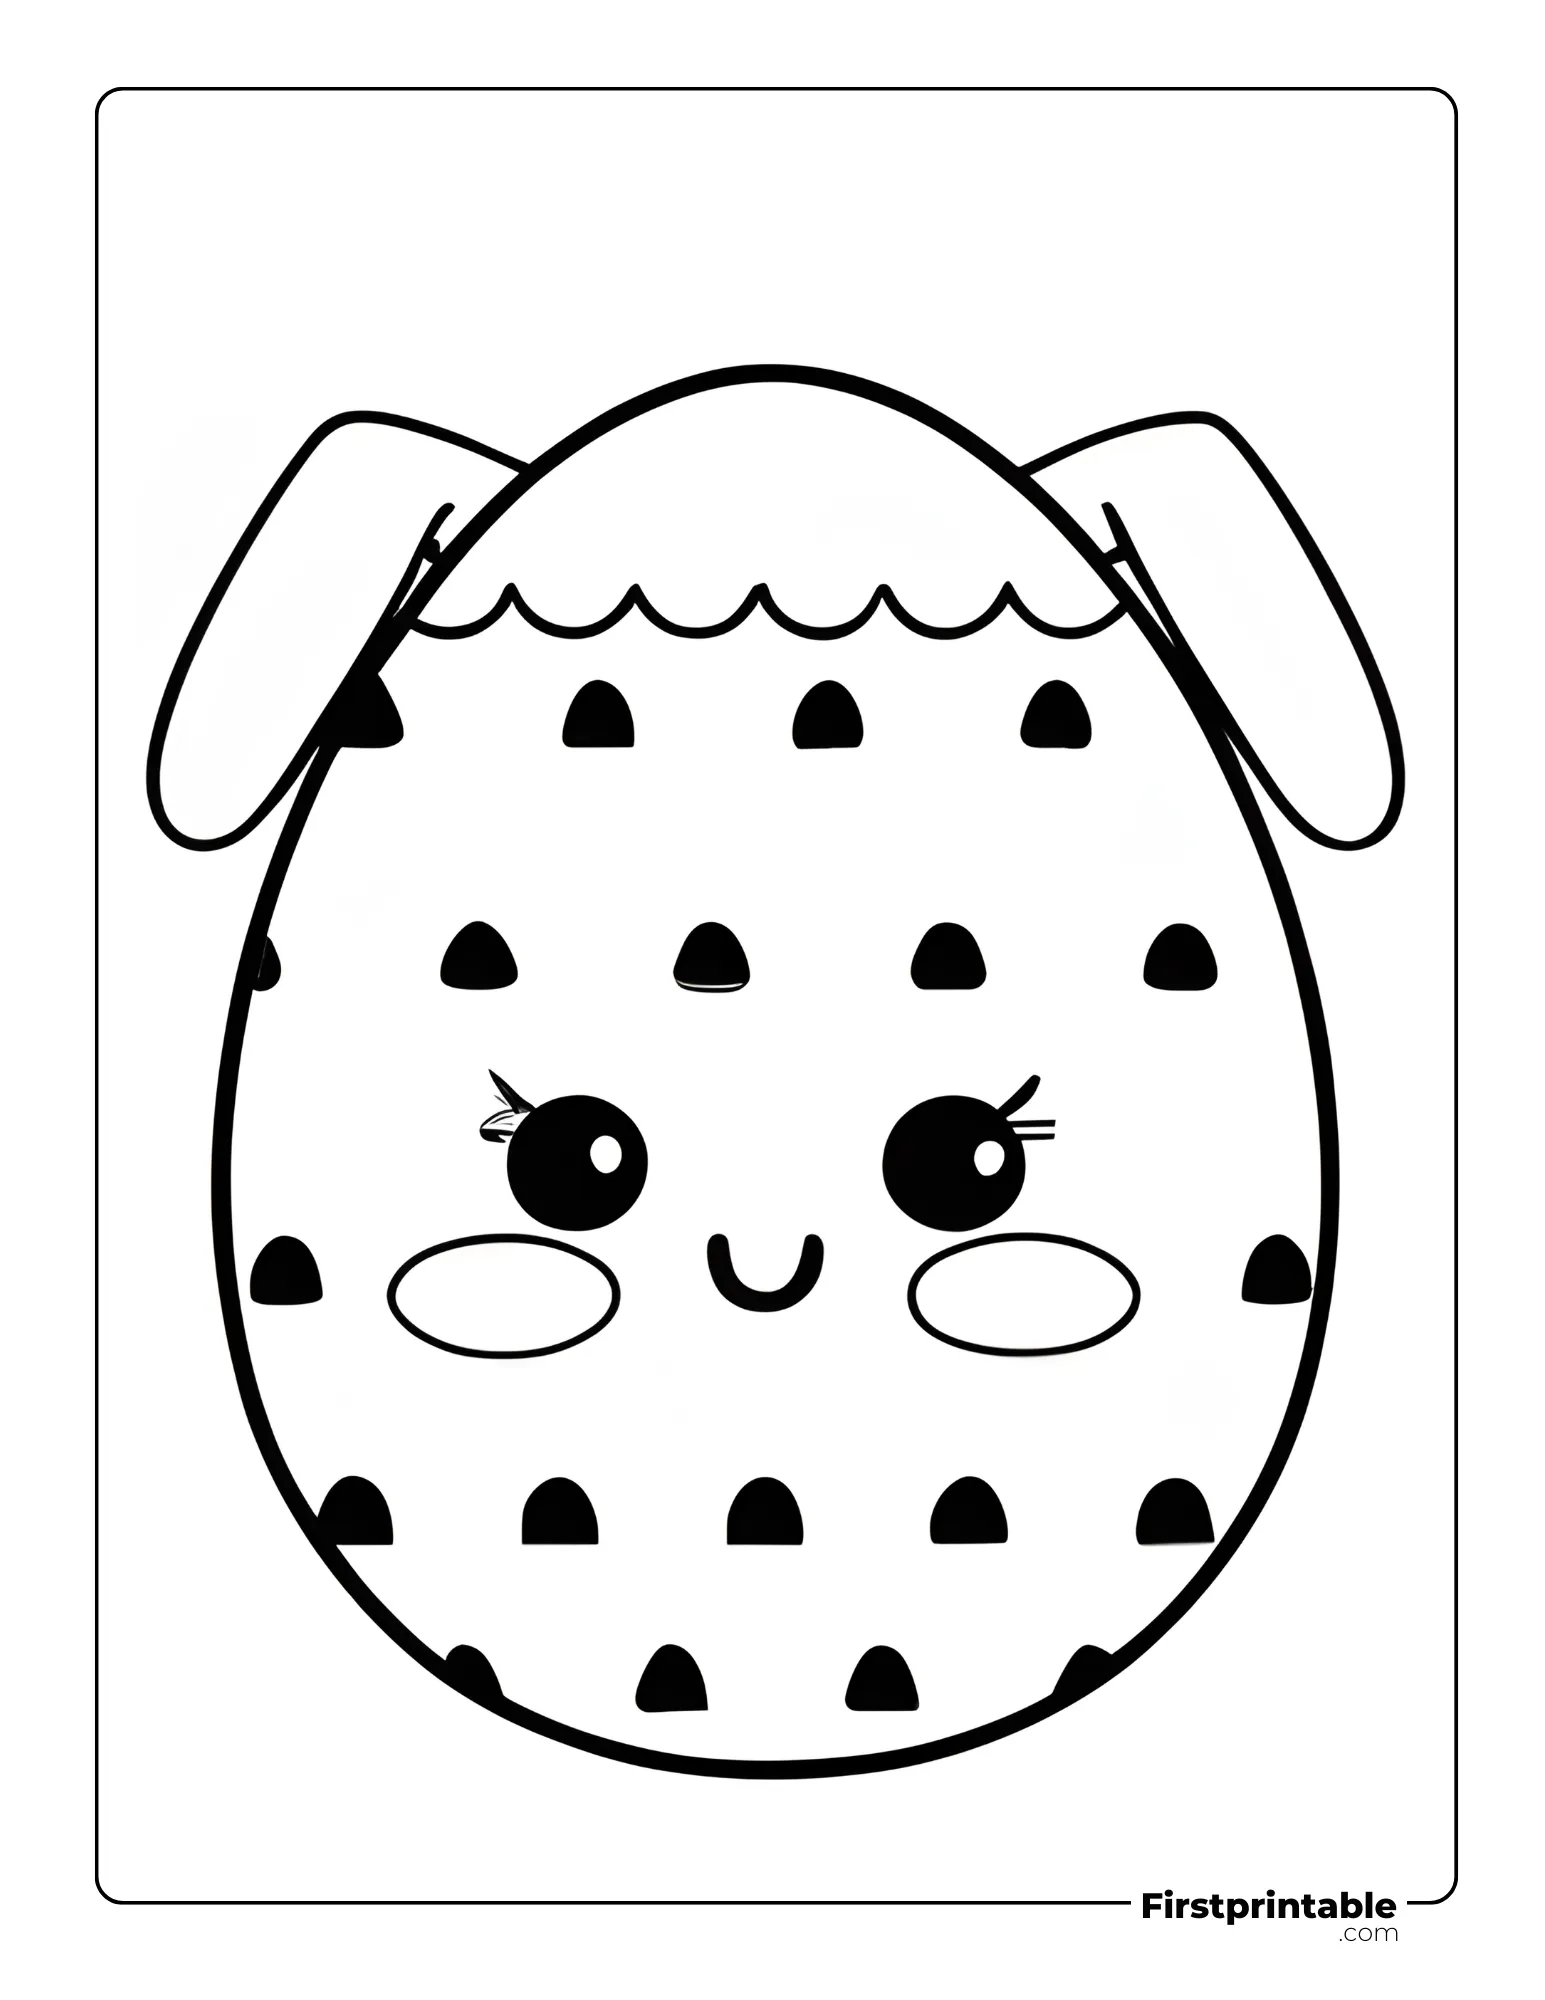 Easter egg coloring page for preschoolers